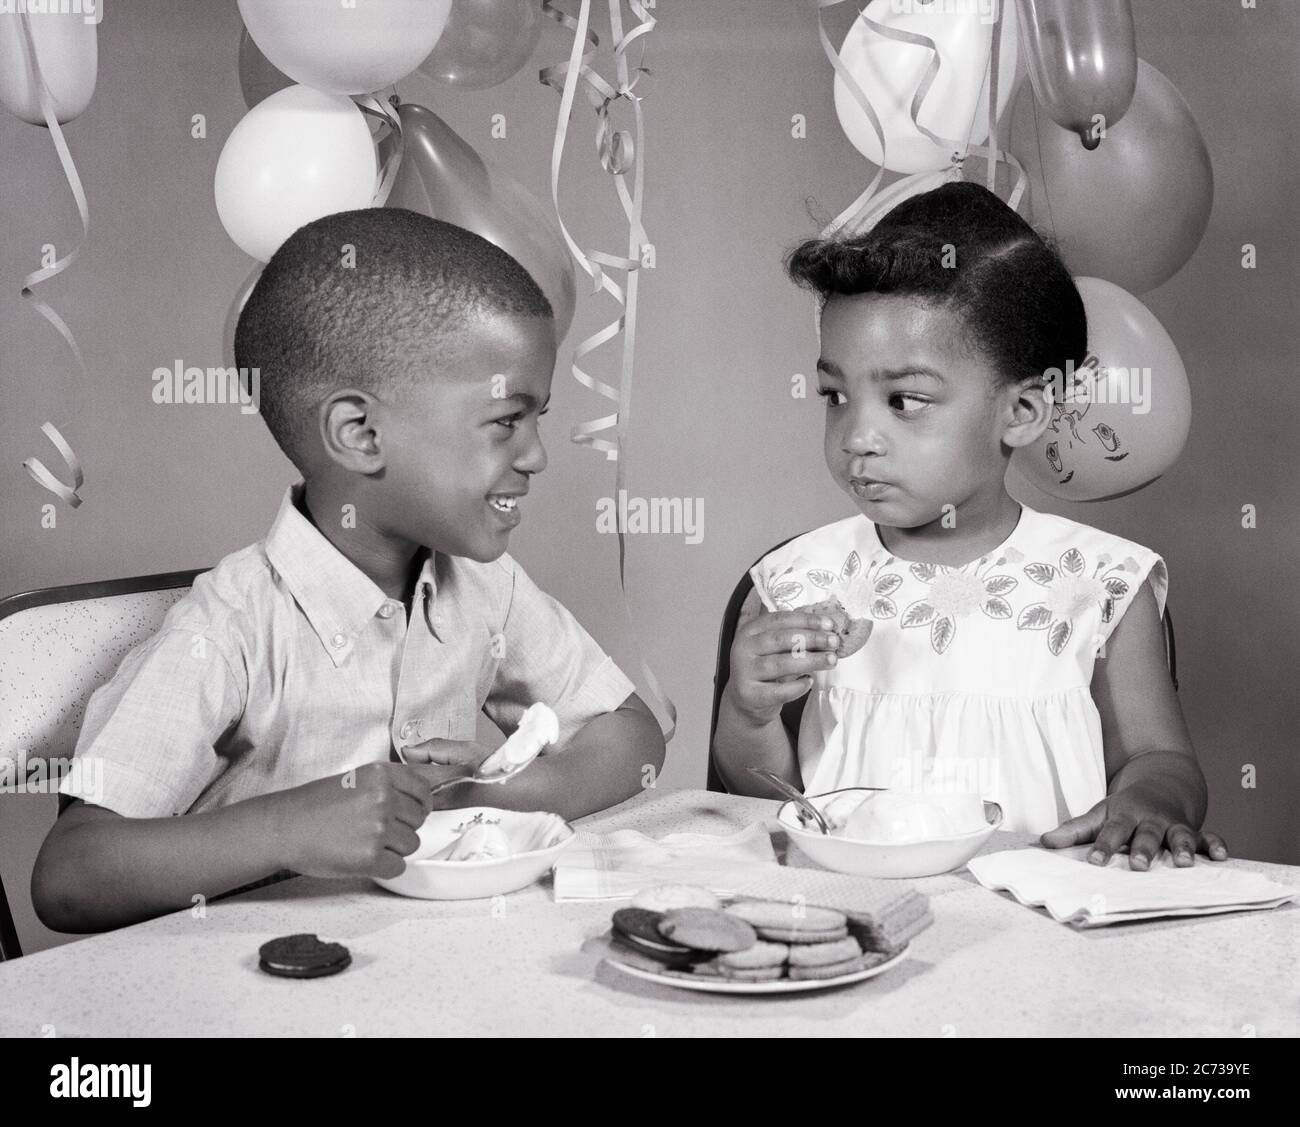 1960s TWO AFRICAN AMERICAN CHILDREN BOY GIRL BROTHER SISTER LOOKING AT EACH OTHER EATING ICE CREAM COOKIES BIRTHDAY PARTY - n2081 HAR001 HARS FACIAL COMMUNICATION COMIC PLEASED JOY LIFESTYLE FEMALES BROTHERS HOME LIFE COPY SPACE FRIENDSHIP HALF-LENGTH MALES COOKIES SIBLINGS SISTERS EXPRESSIONS B&W FROWNING HUMOROUS CHEERFUL AFRICAN-AMERICANS AFRICAN-AMERICAN ENJOYING COMICAL AT SIBLING SMILES COMEDY JOYFUL ICE CREAM GROWTH JUVENILES TOGETHERNESS BLACK AND WHITE EACH OTHER HAR001 OLD FASHIONED AFRICAN AMERICANS Stock Photo